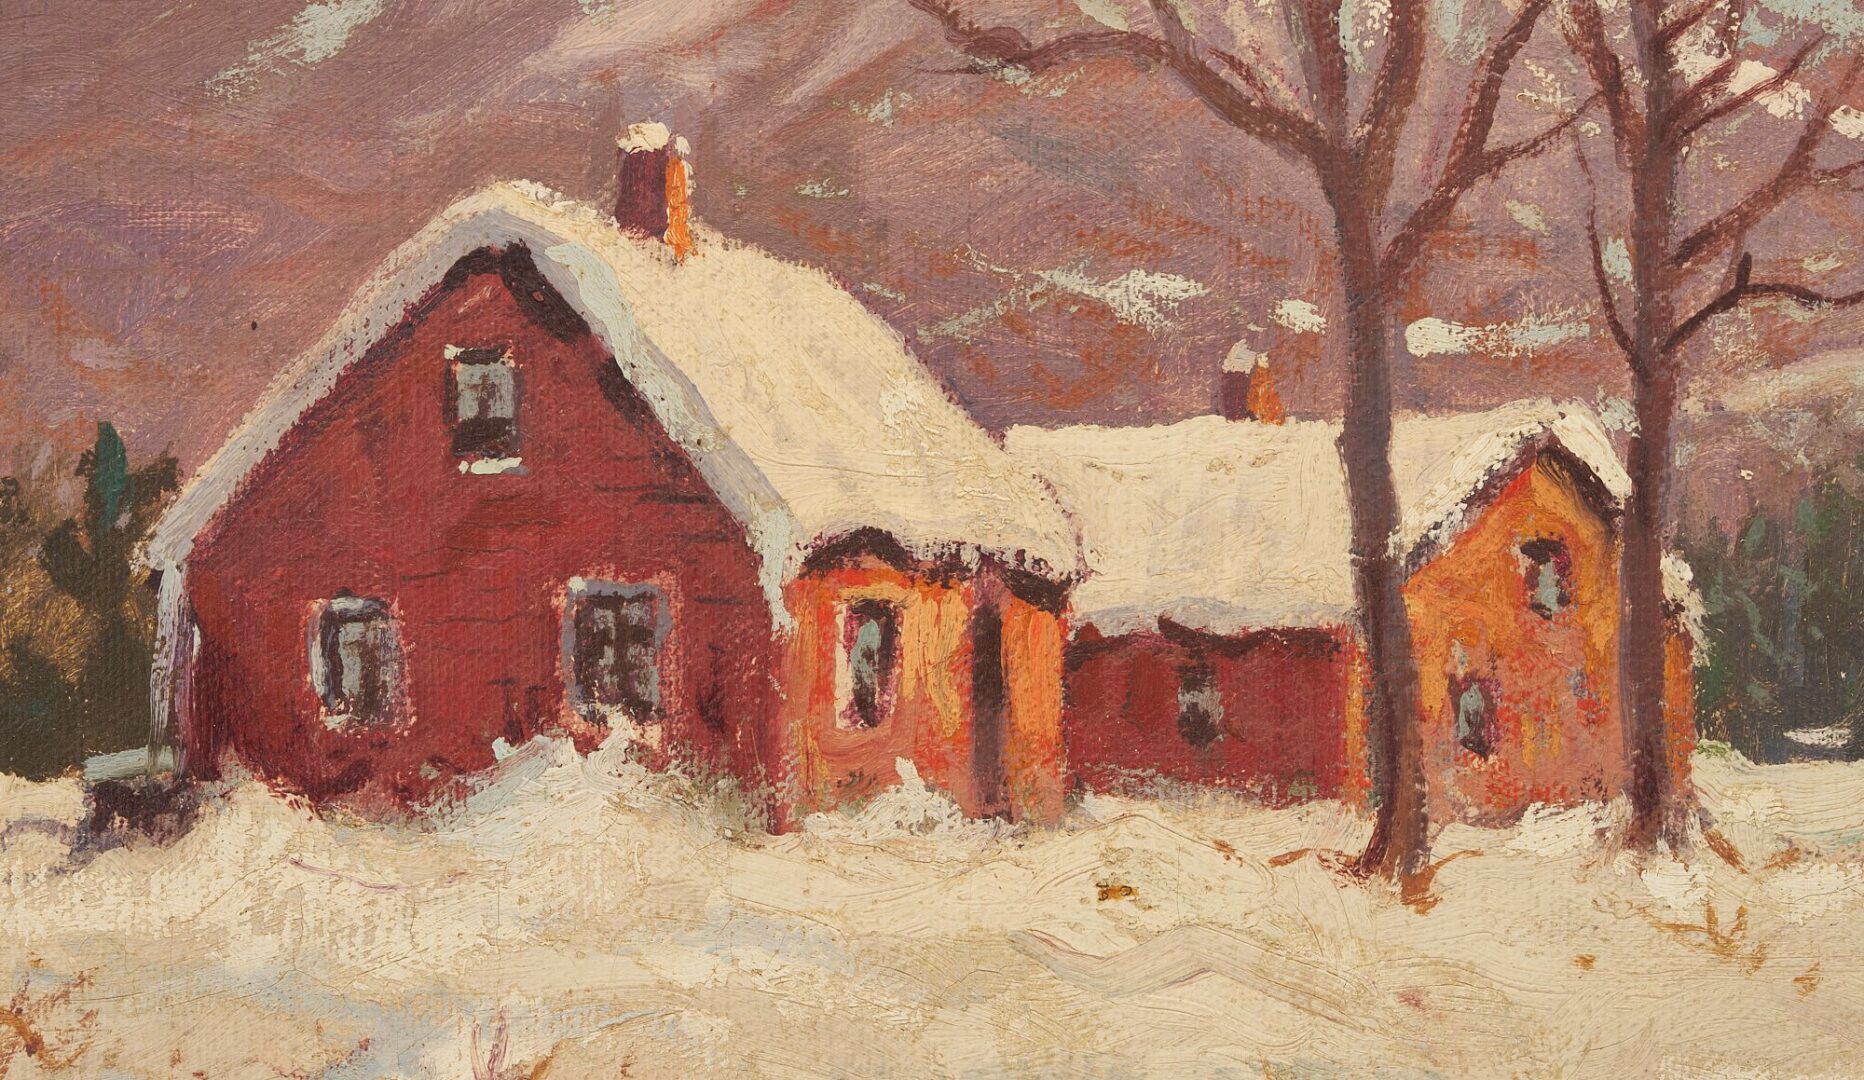 Lot 1010: Harry Howe O/C Snowscape Painting